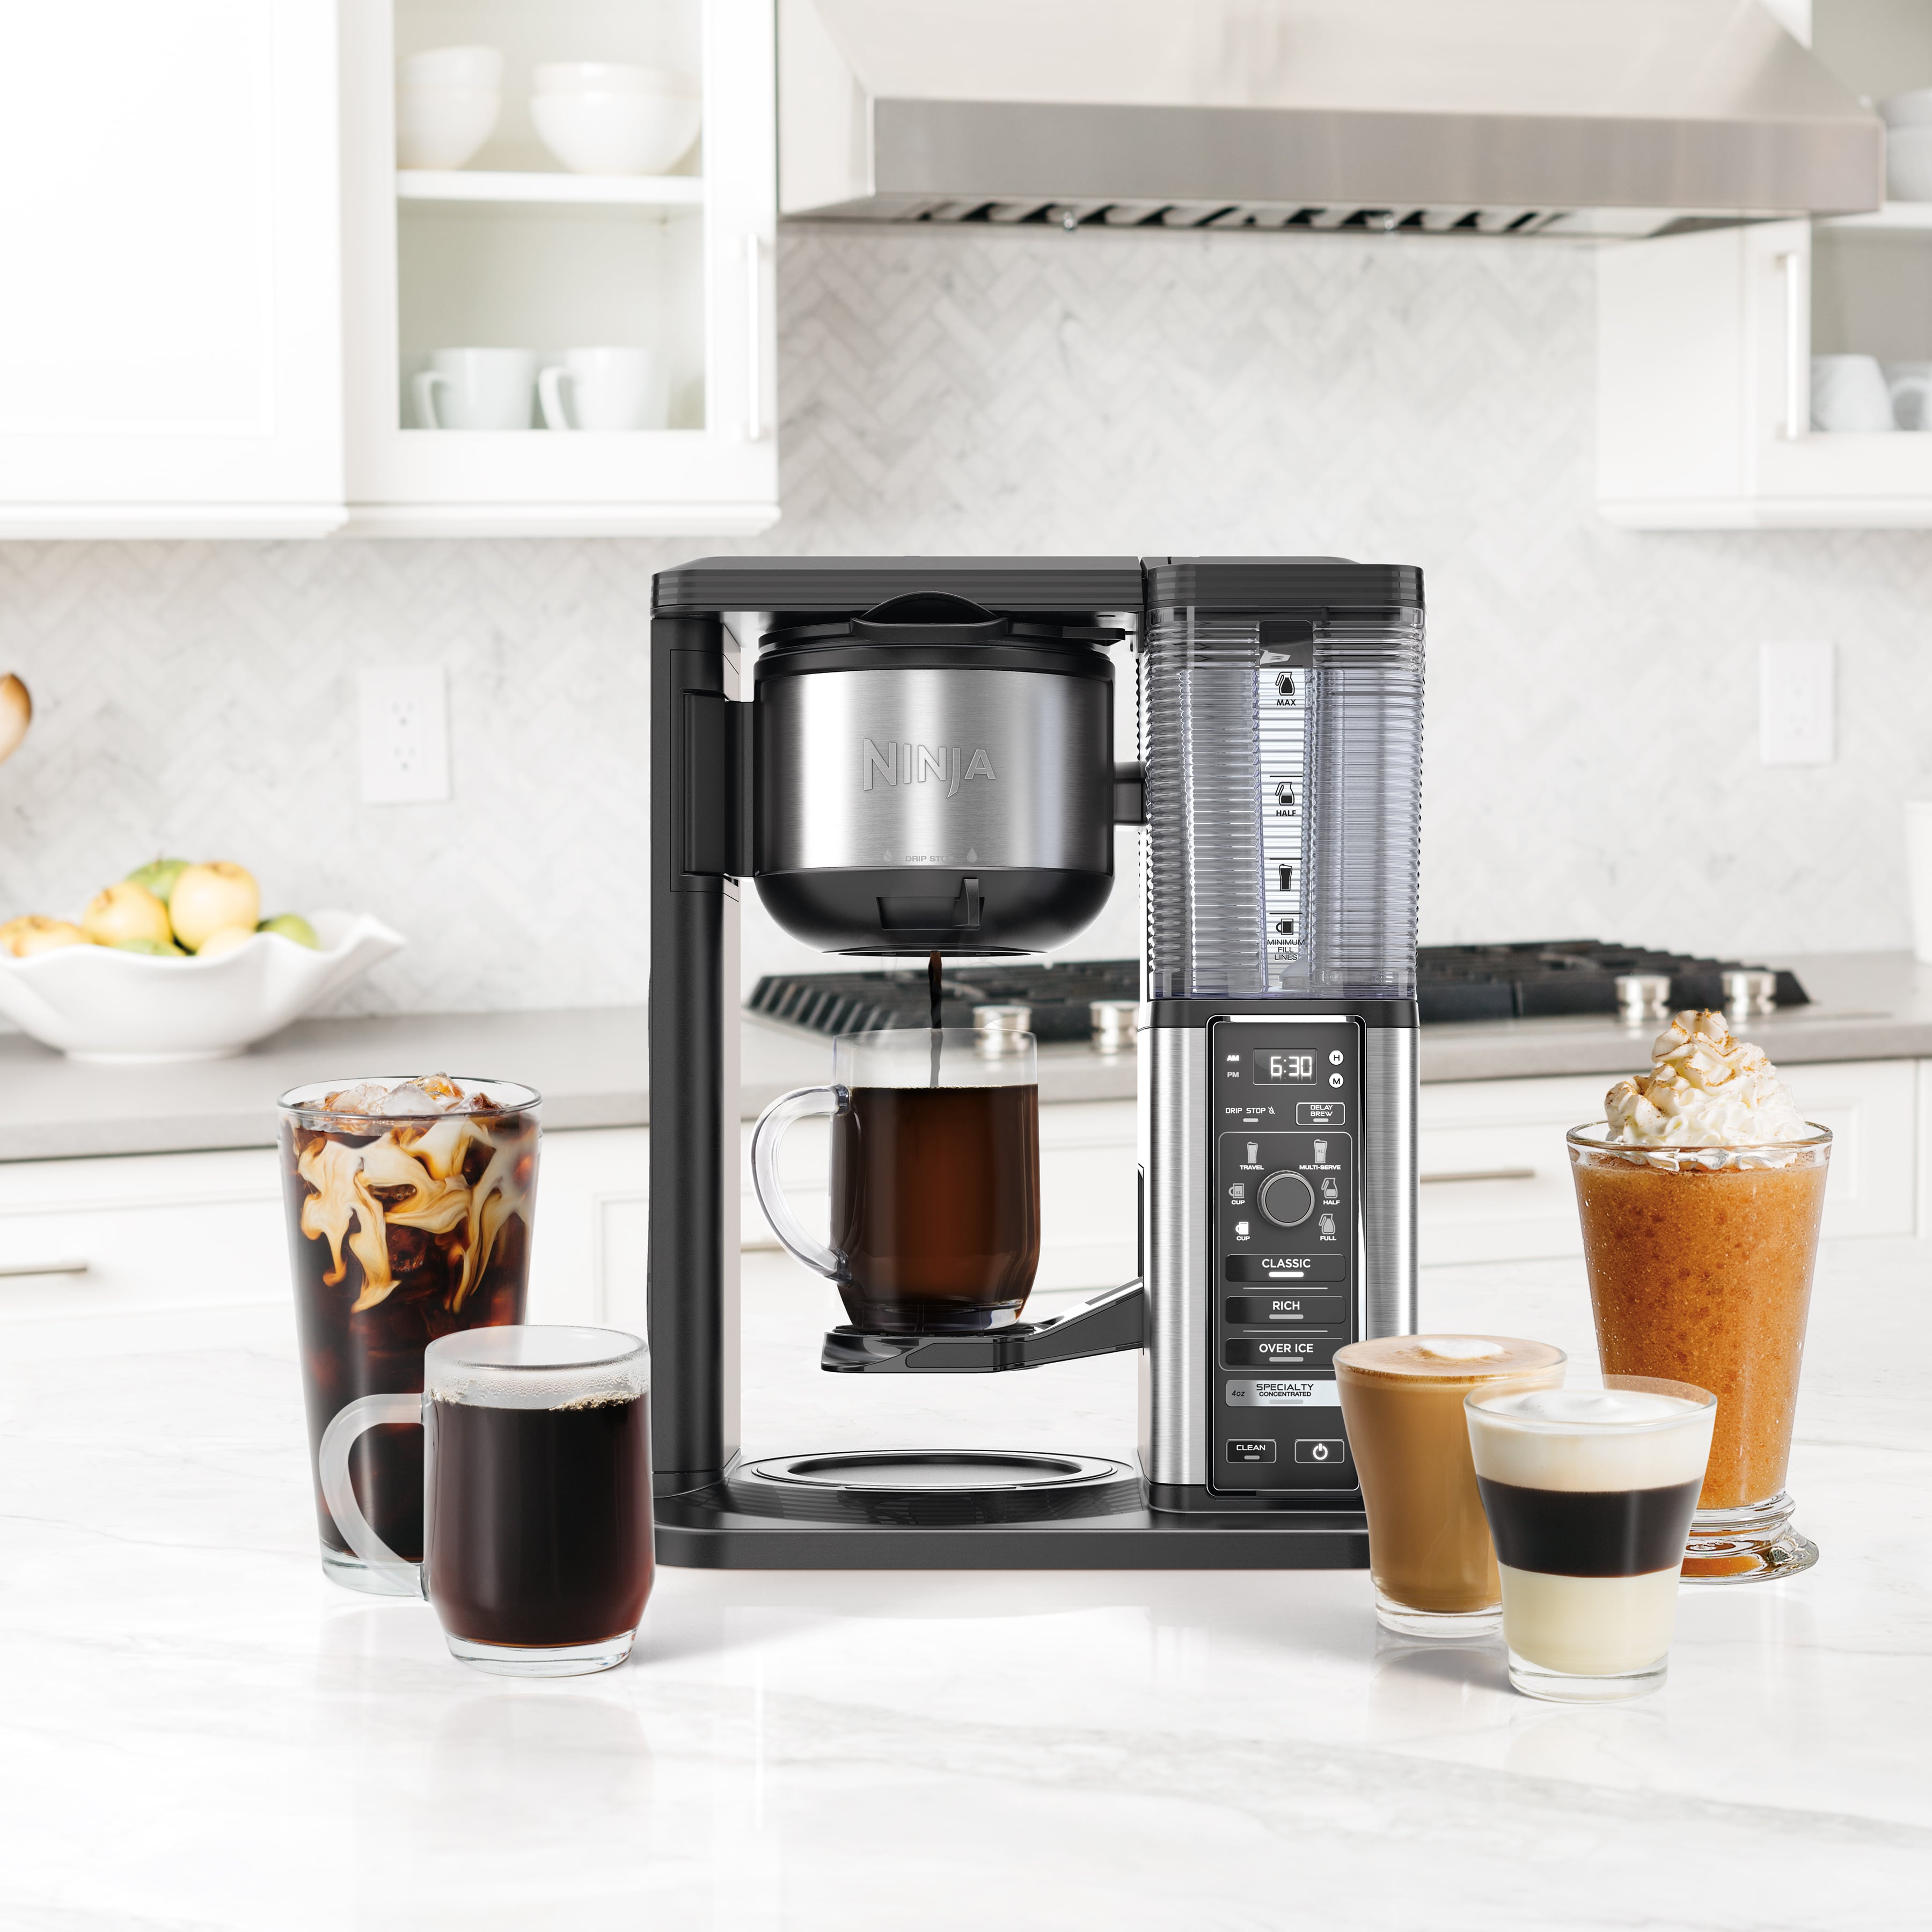 An Honest Review of the Ninja Specialty Coffee Maker: Is it